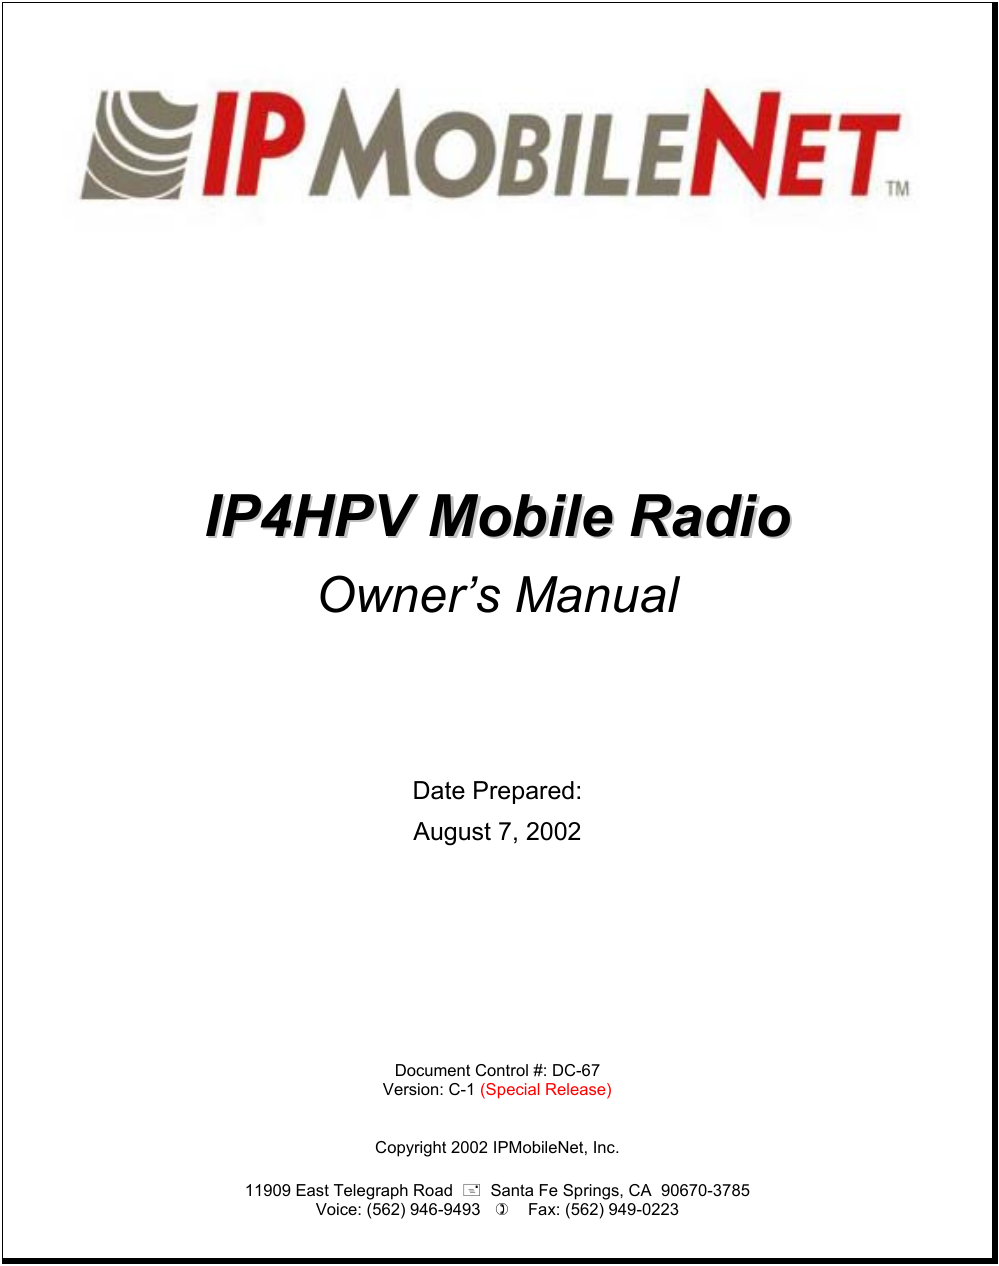               IIPP44HHPPVV  MMoobbiillee  RRaaddiioo  Owner’s Manual      Date Prepared:   August 7, 2002          Document Control #: DC-67 Version: C-1 (Special Release)   Copyright 2002 IPMobileNet, Inc.  11909 East Telegraph Road    Santa Fe Springs, CA  90670-3785 Voice: (562) 946-9493       Fax: (562) 949-0223    